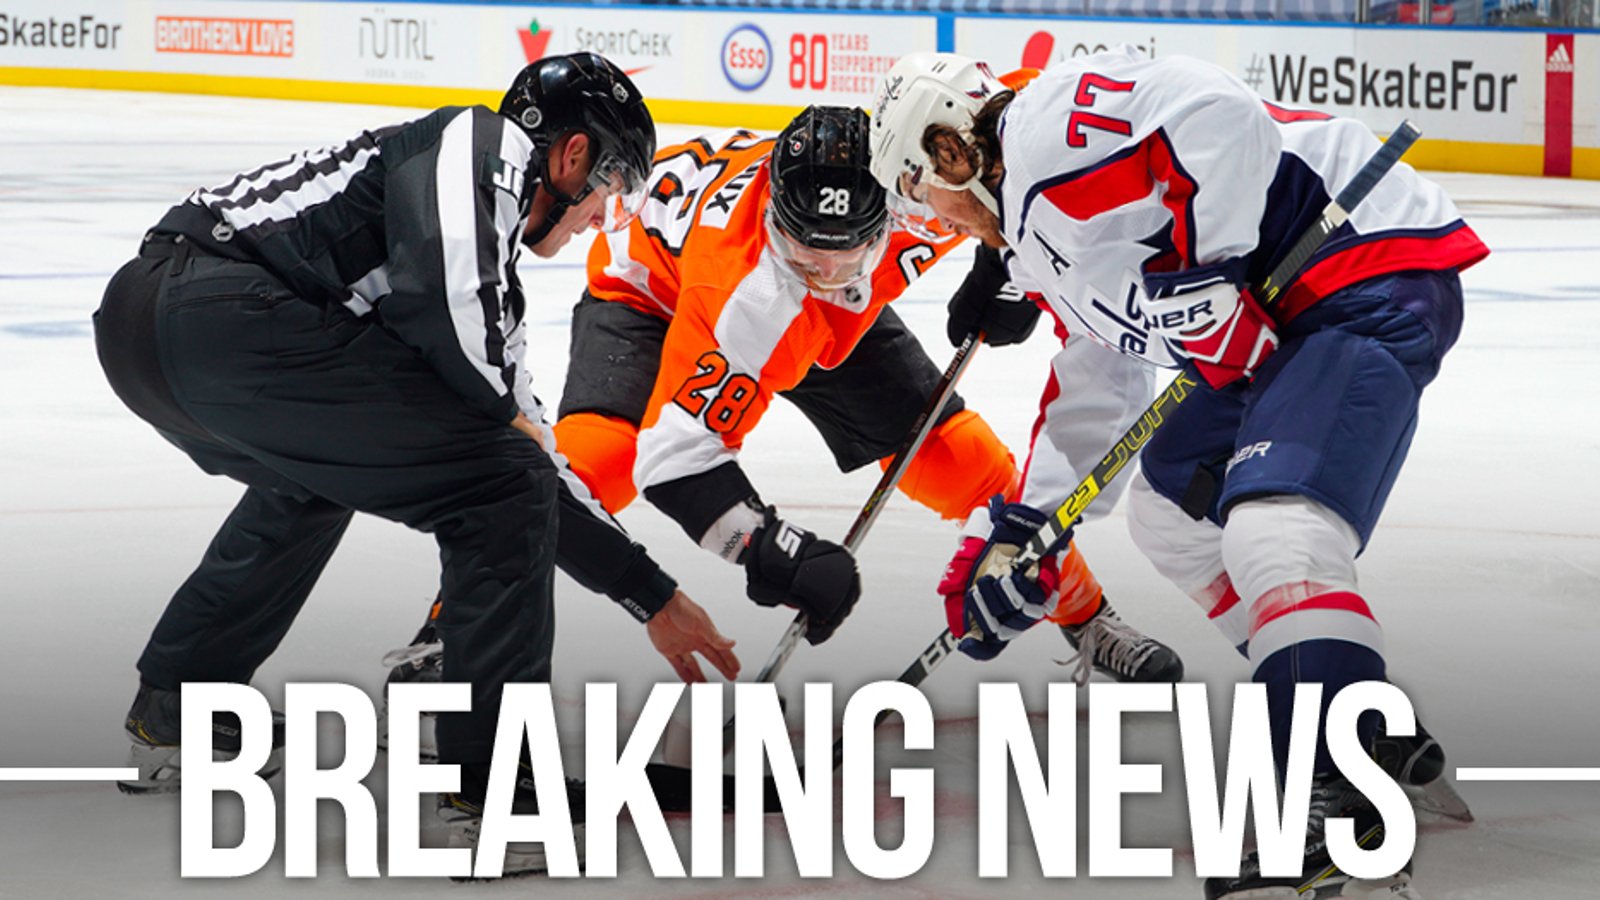 Report: Flyers and Capitals game to be postponed